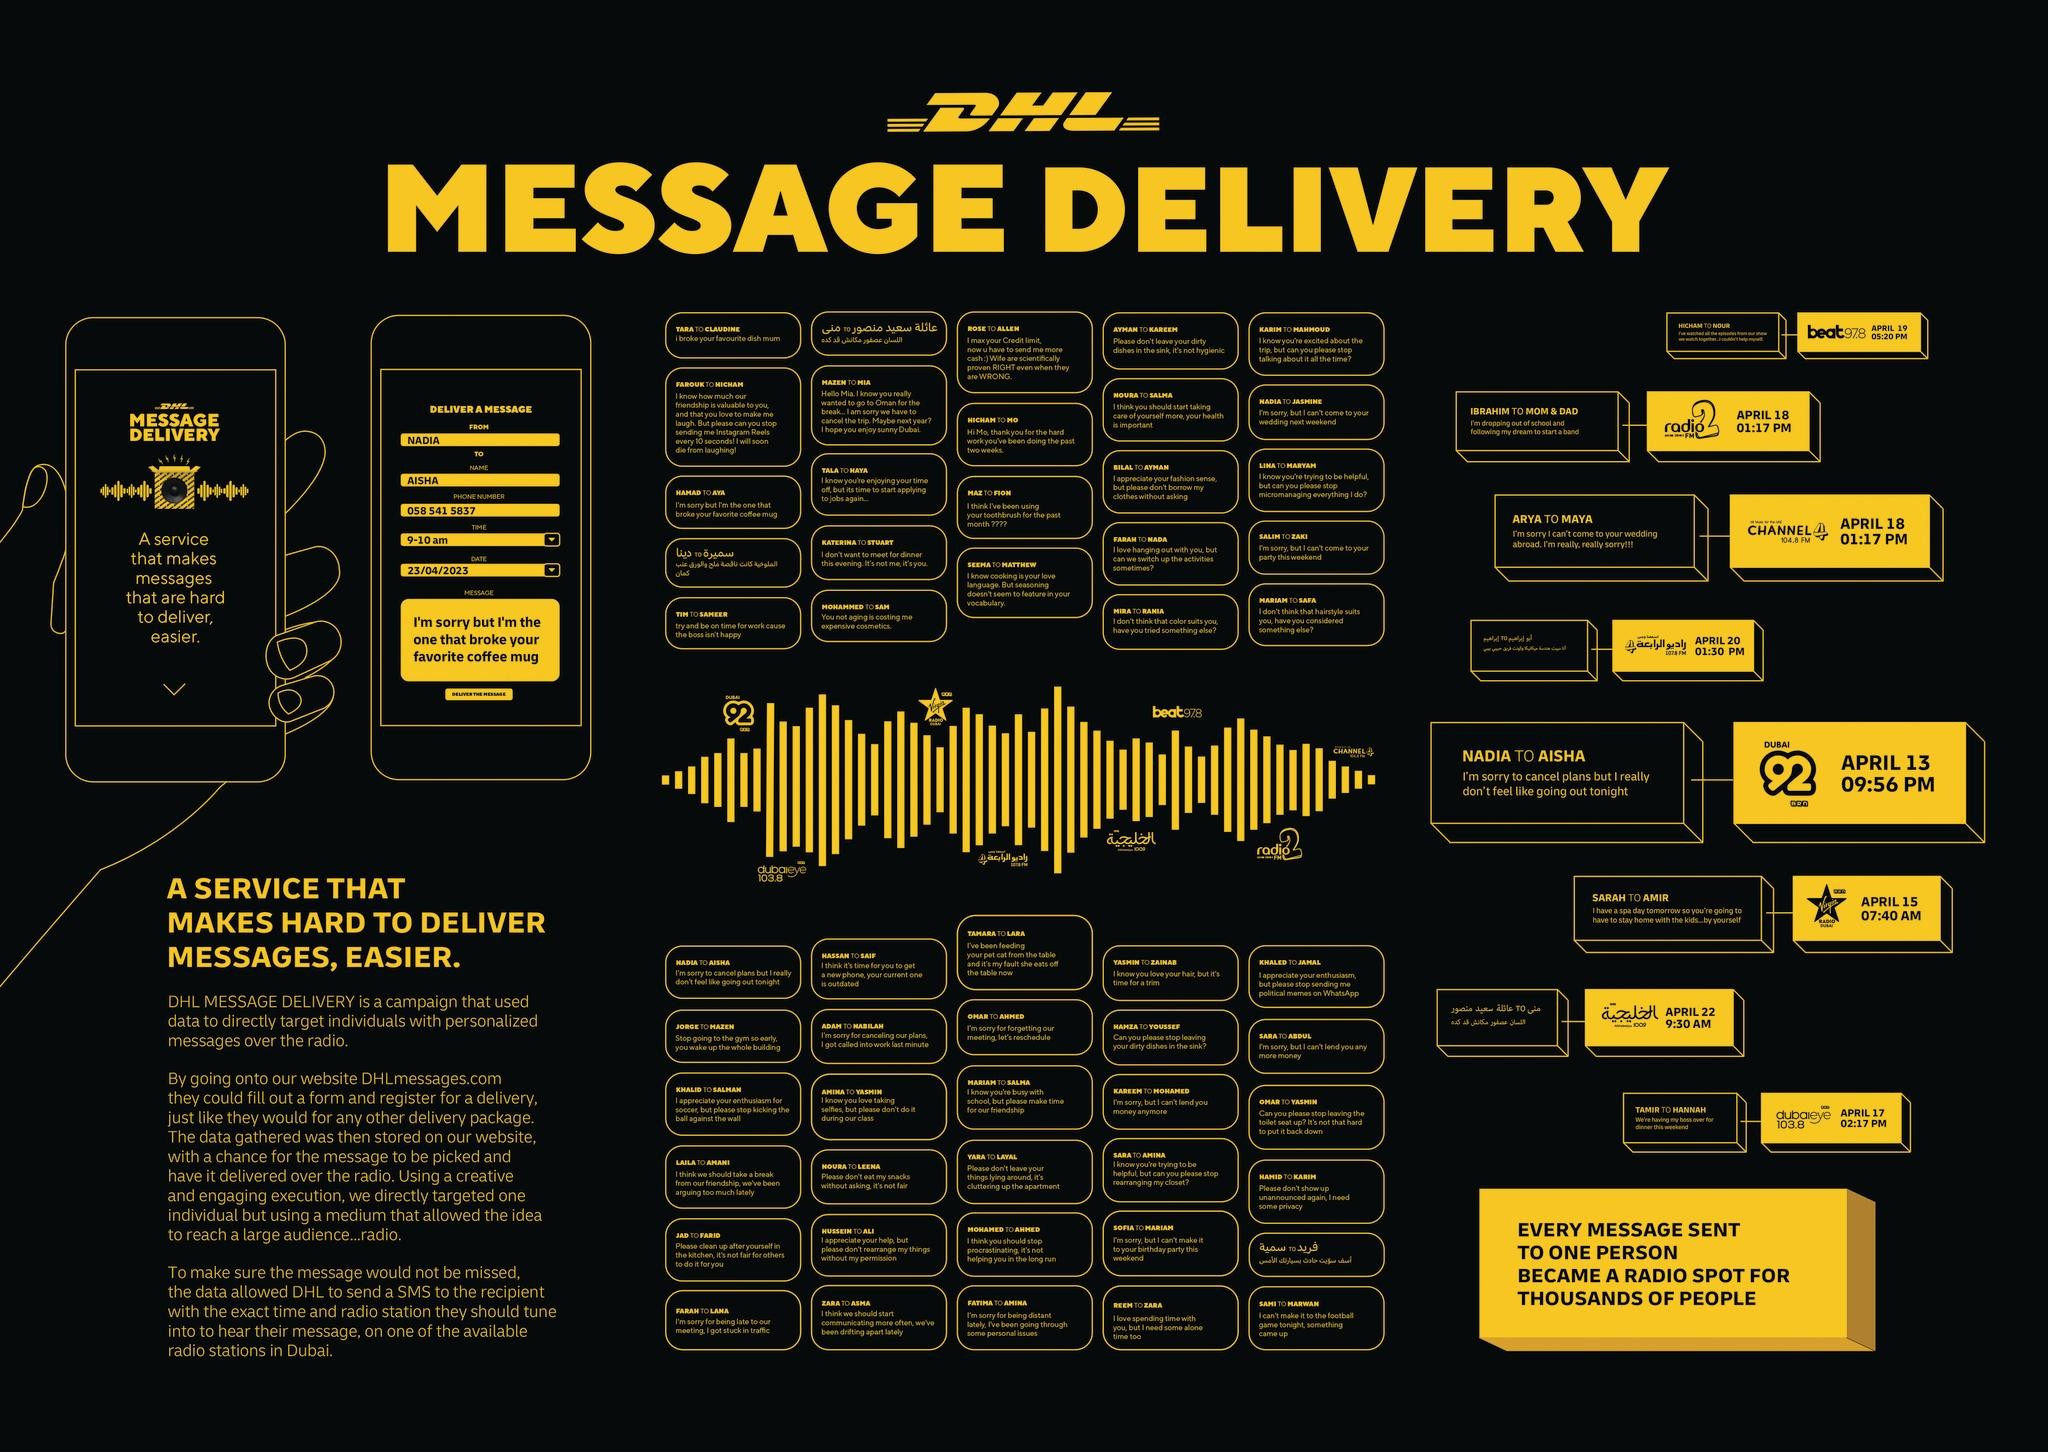 DHL MESSAGE DELIVERY